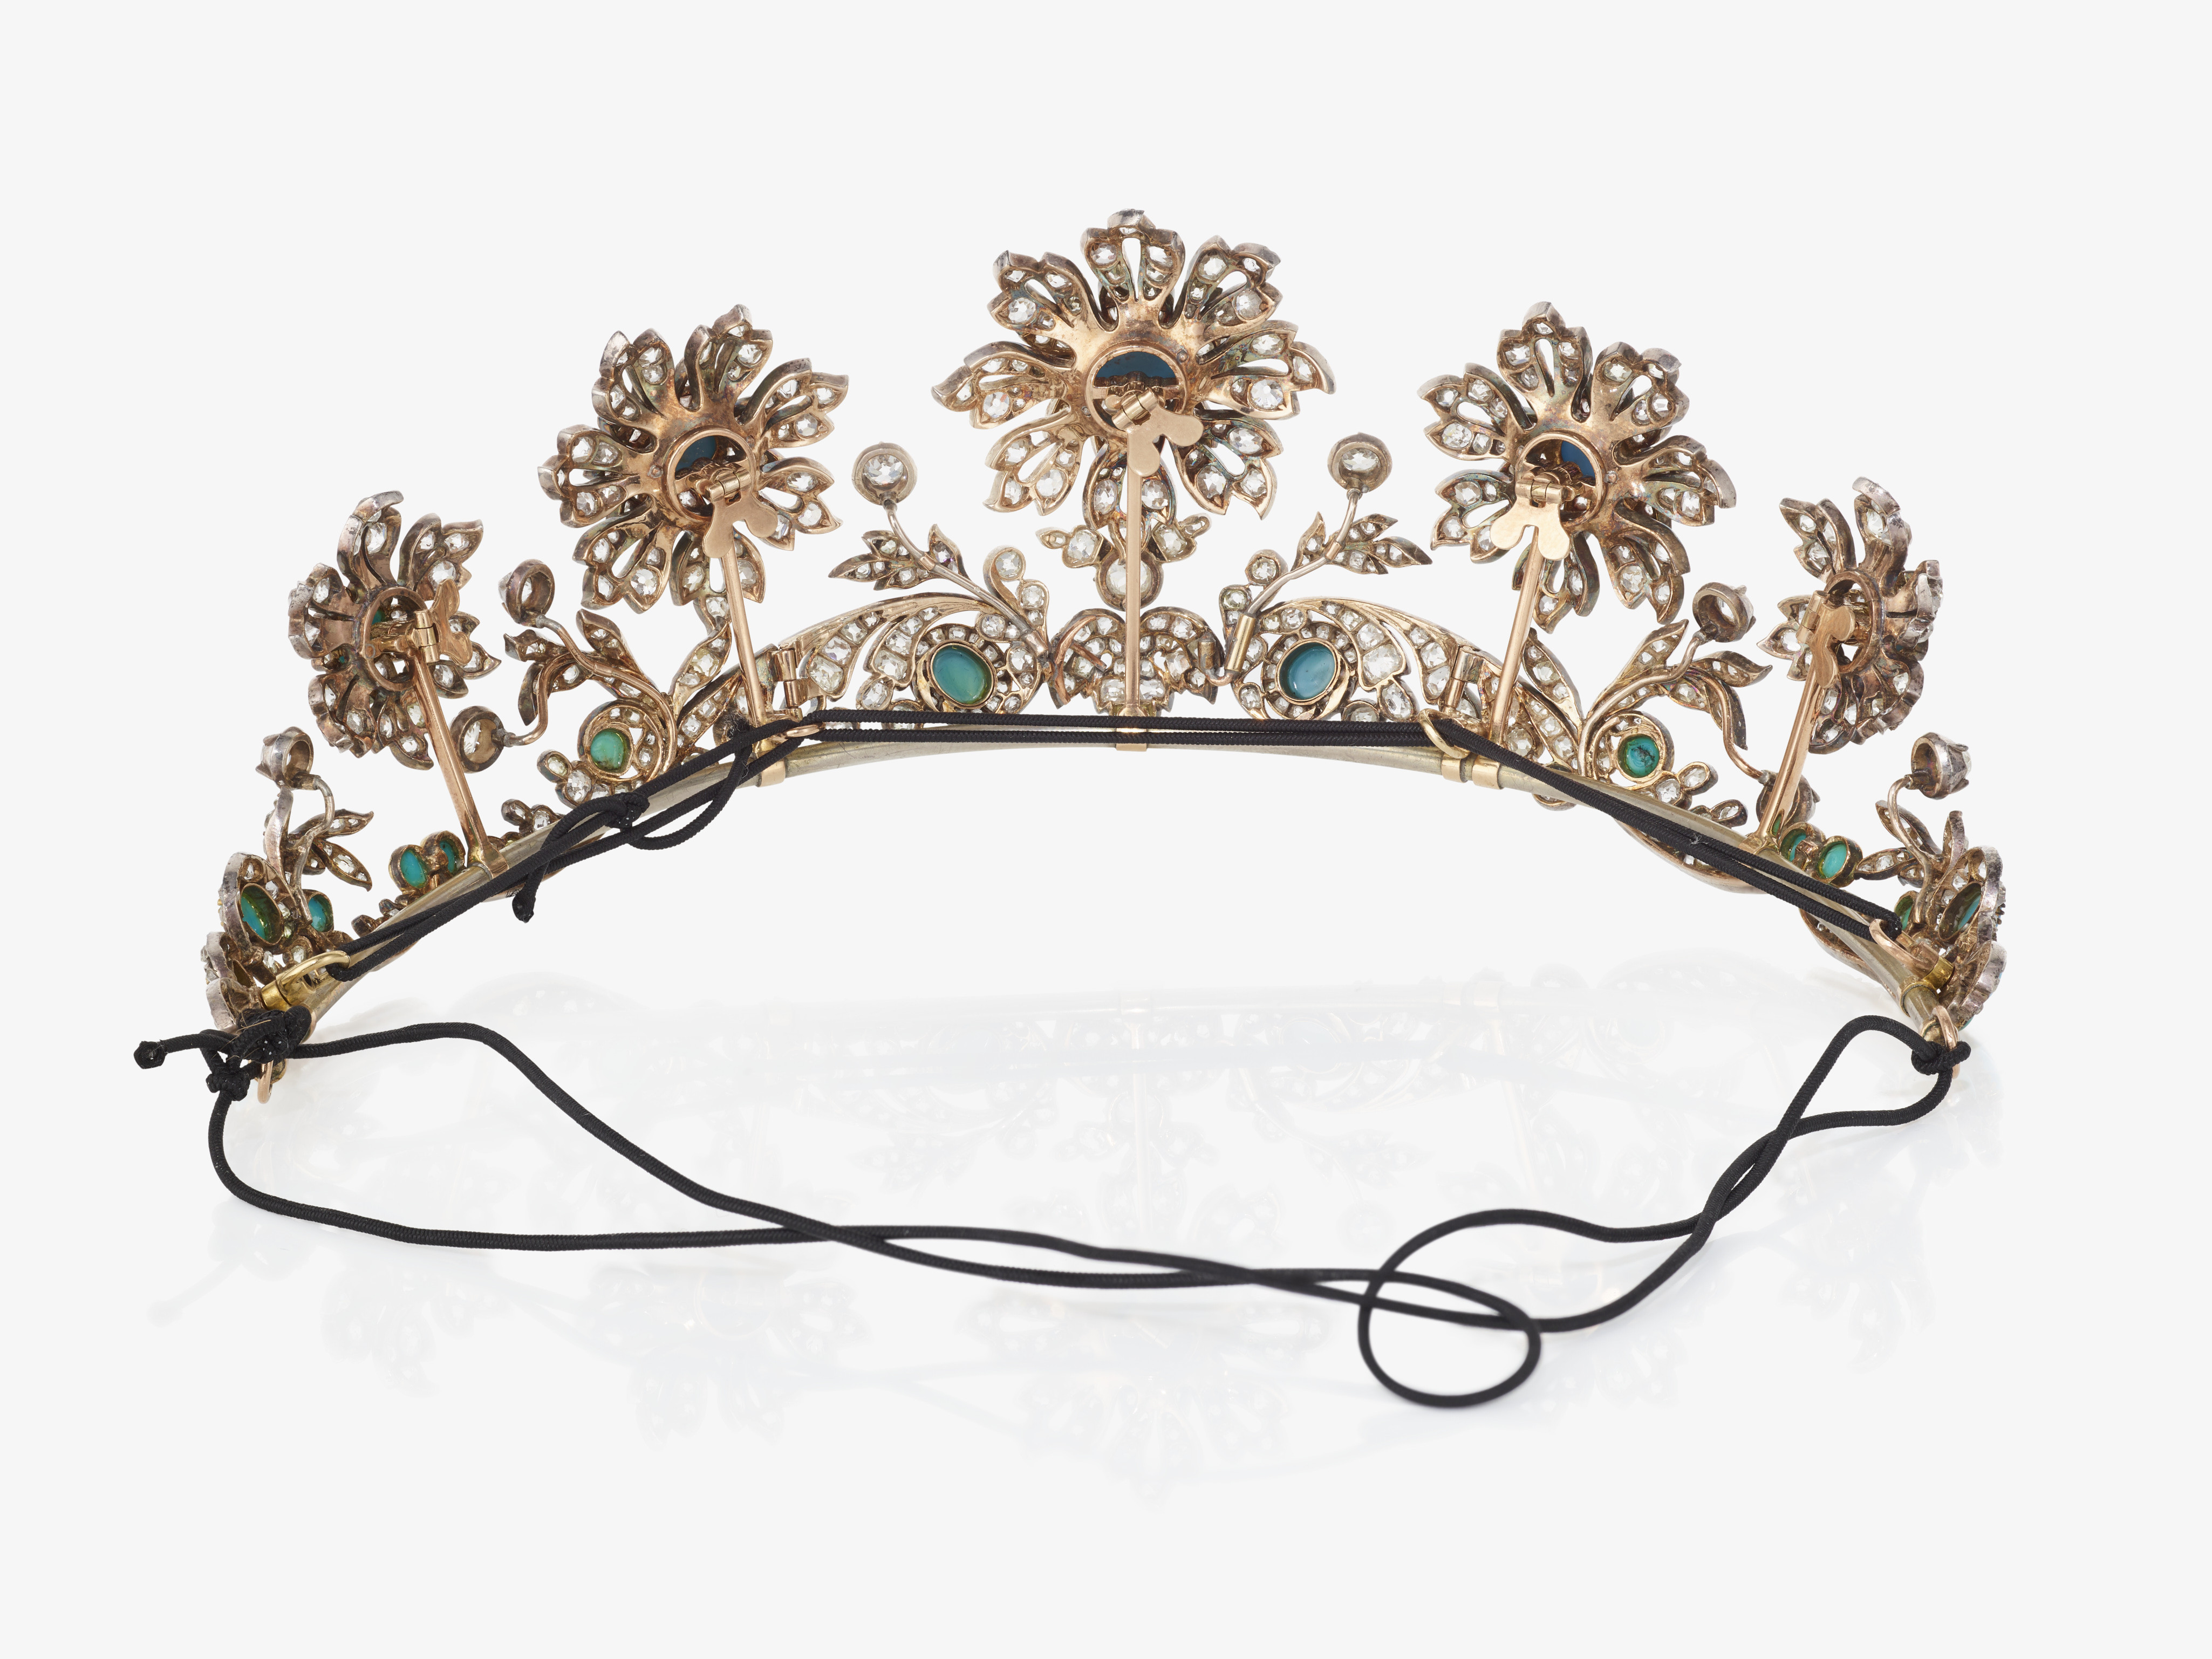 A tiara with turquoise and diamonds - Image 8 of 16